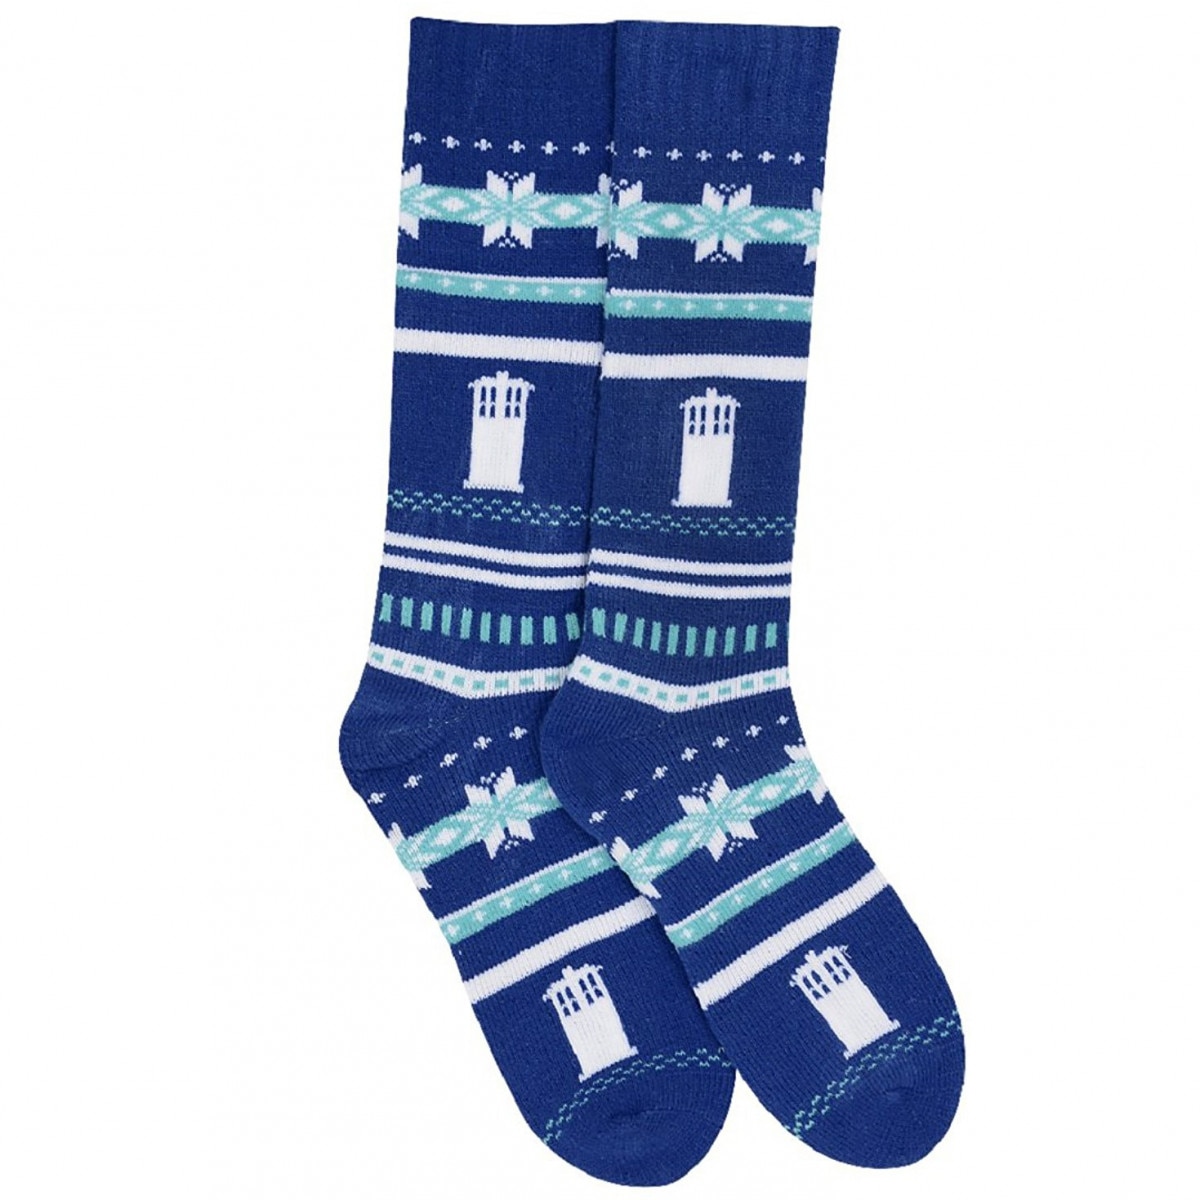 Image of a pair of blue socks with a TARDIS Christmas pattern on them